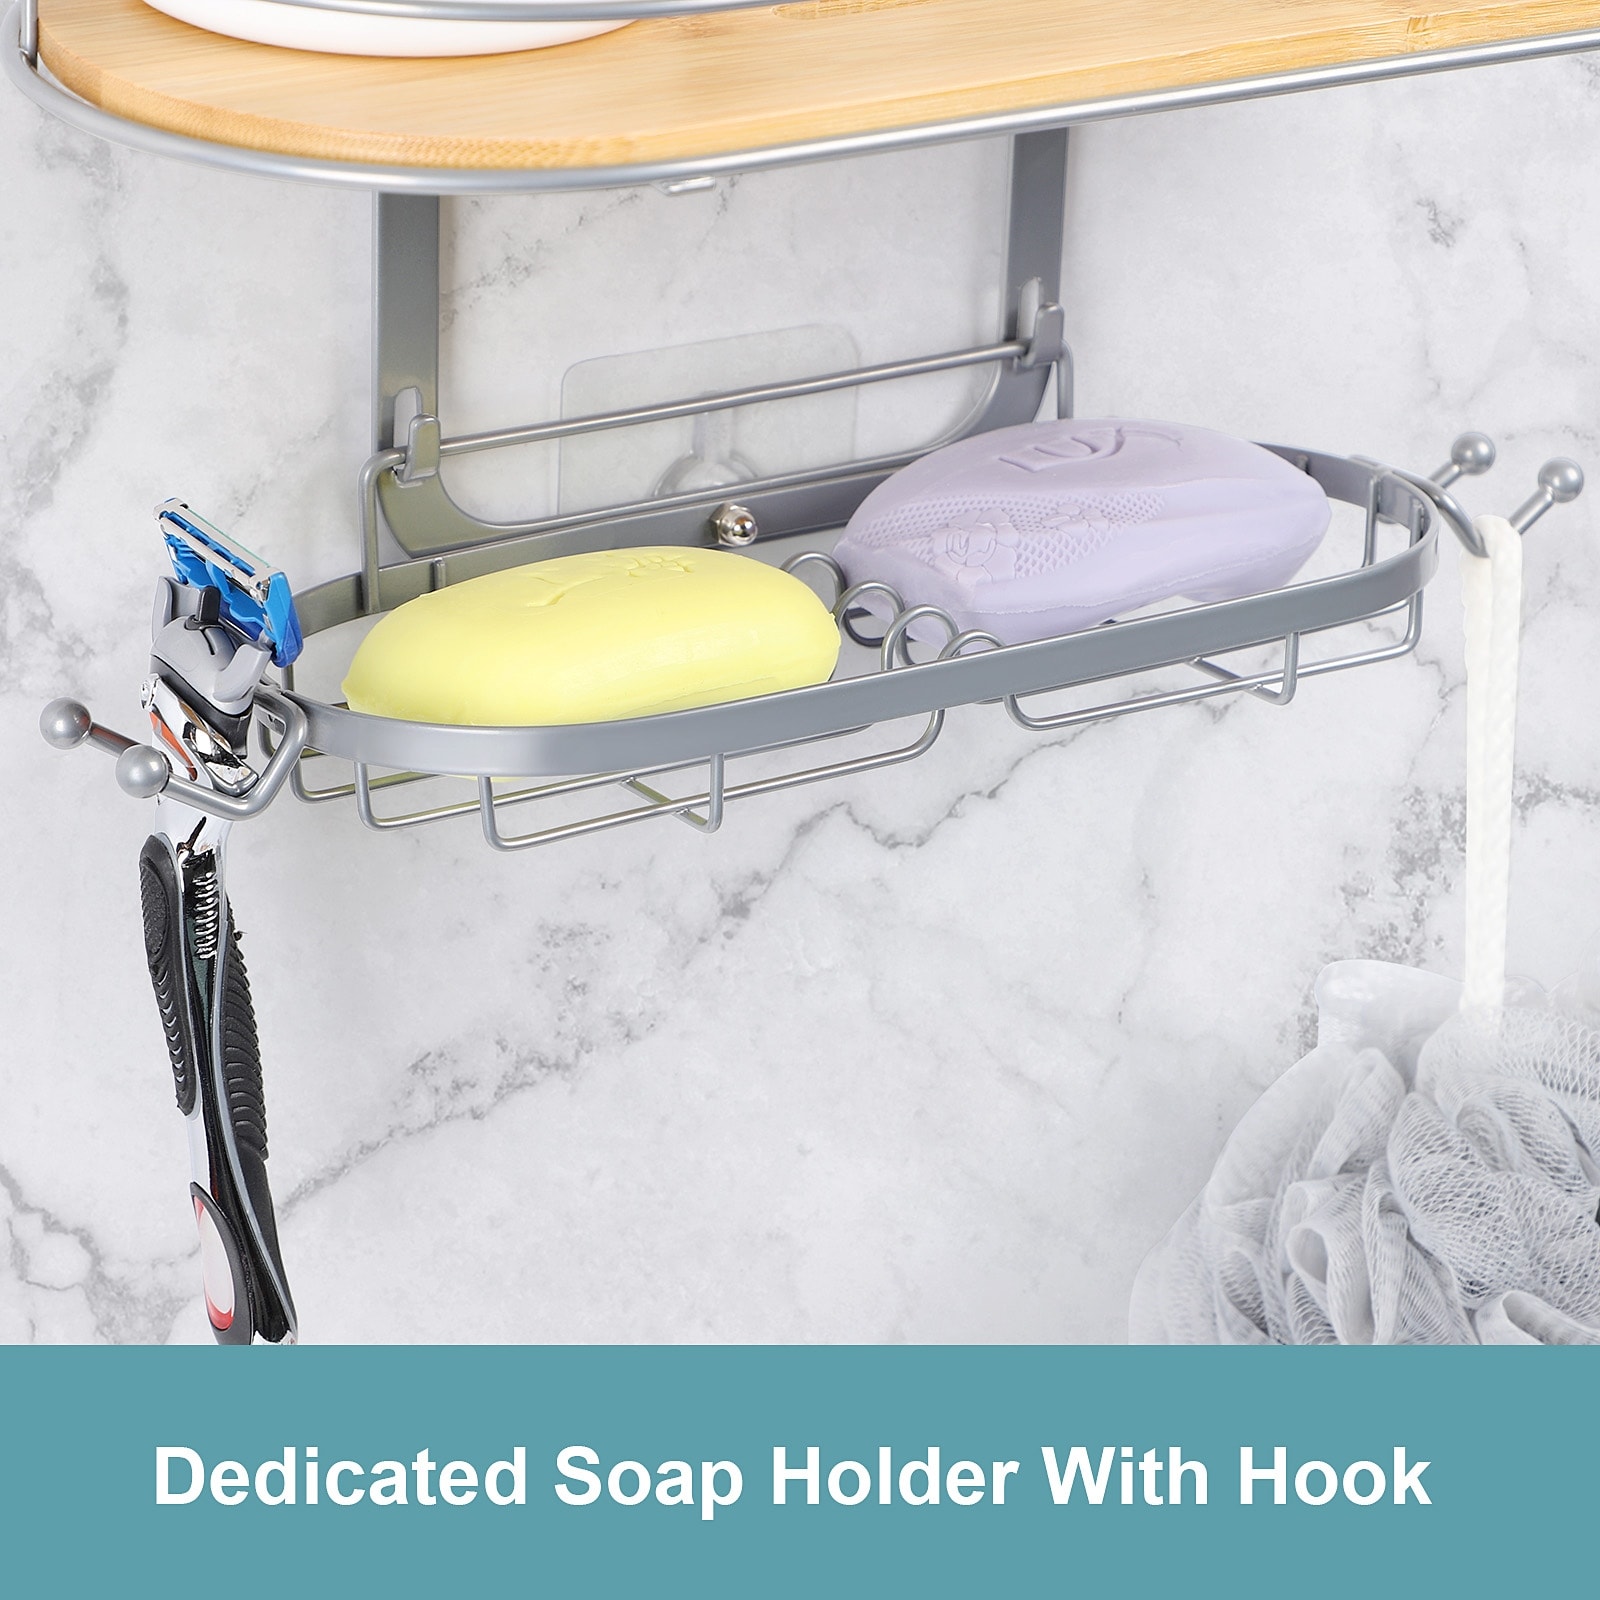 https://ak1.ostkcdn.com/images/products/is/images/direct/8ae85dae2674204a7fcbca125f19af8eeb647e80/Over-Head-Shower-Caddy.jpg